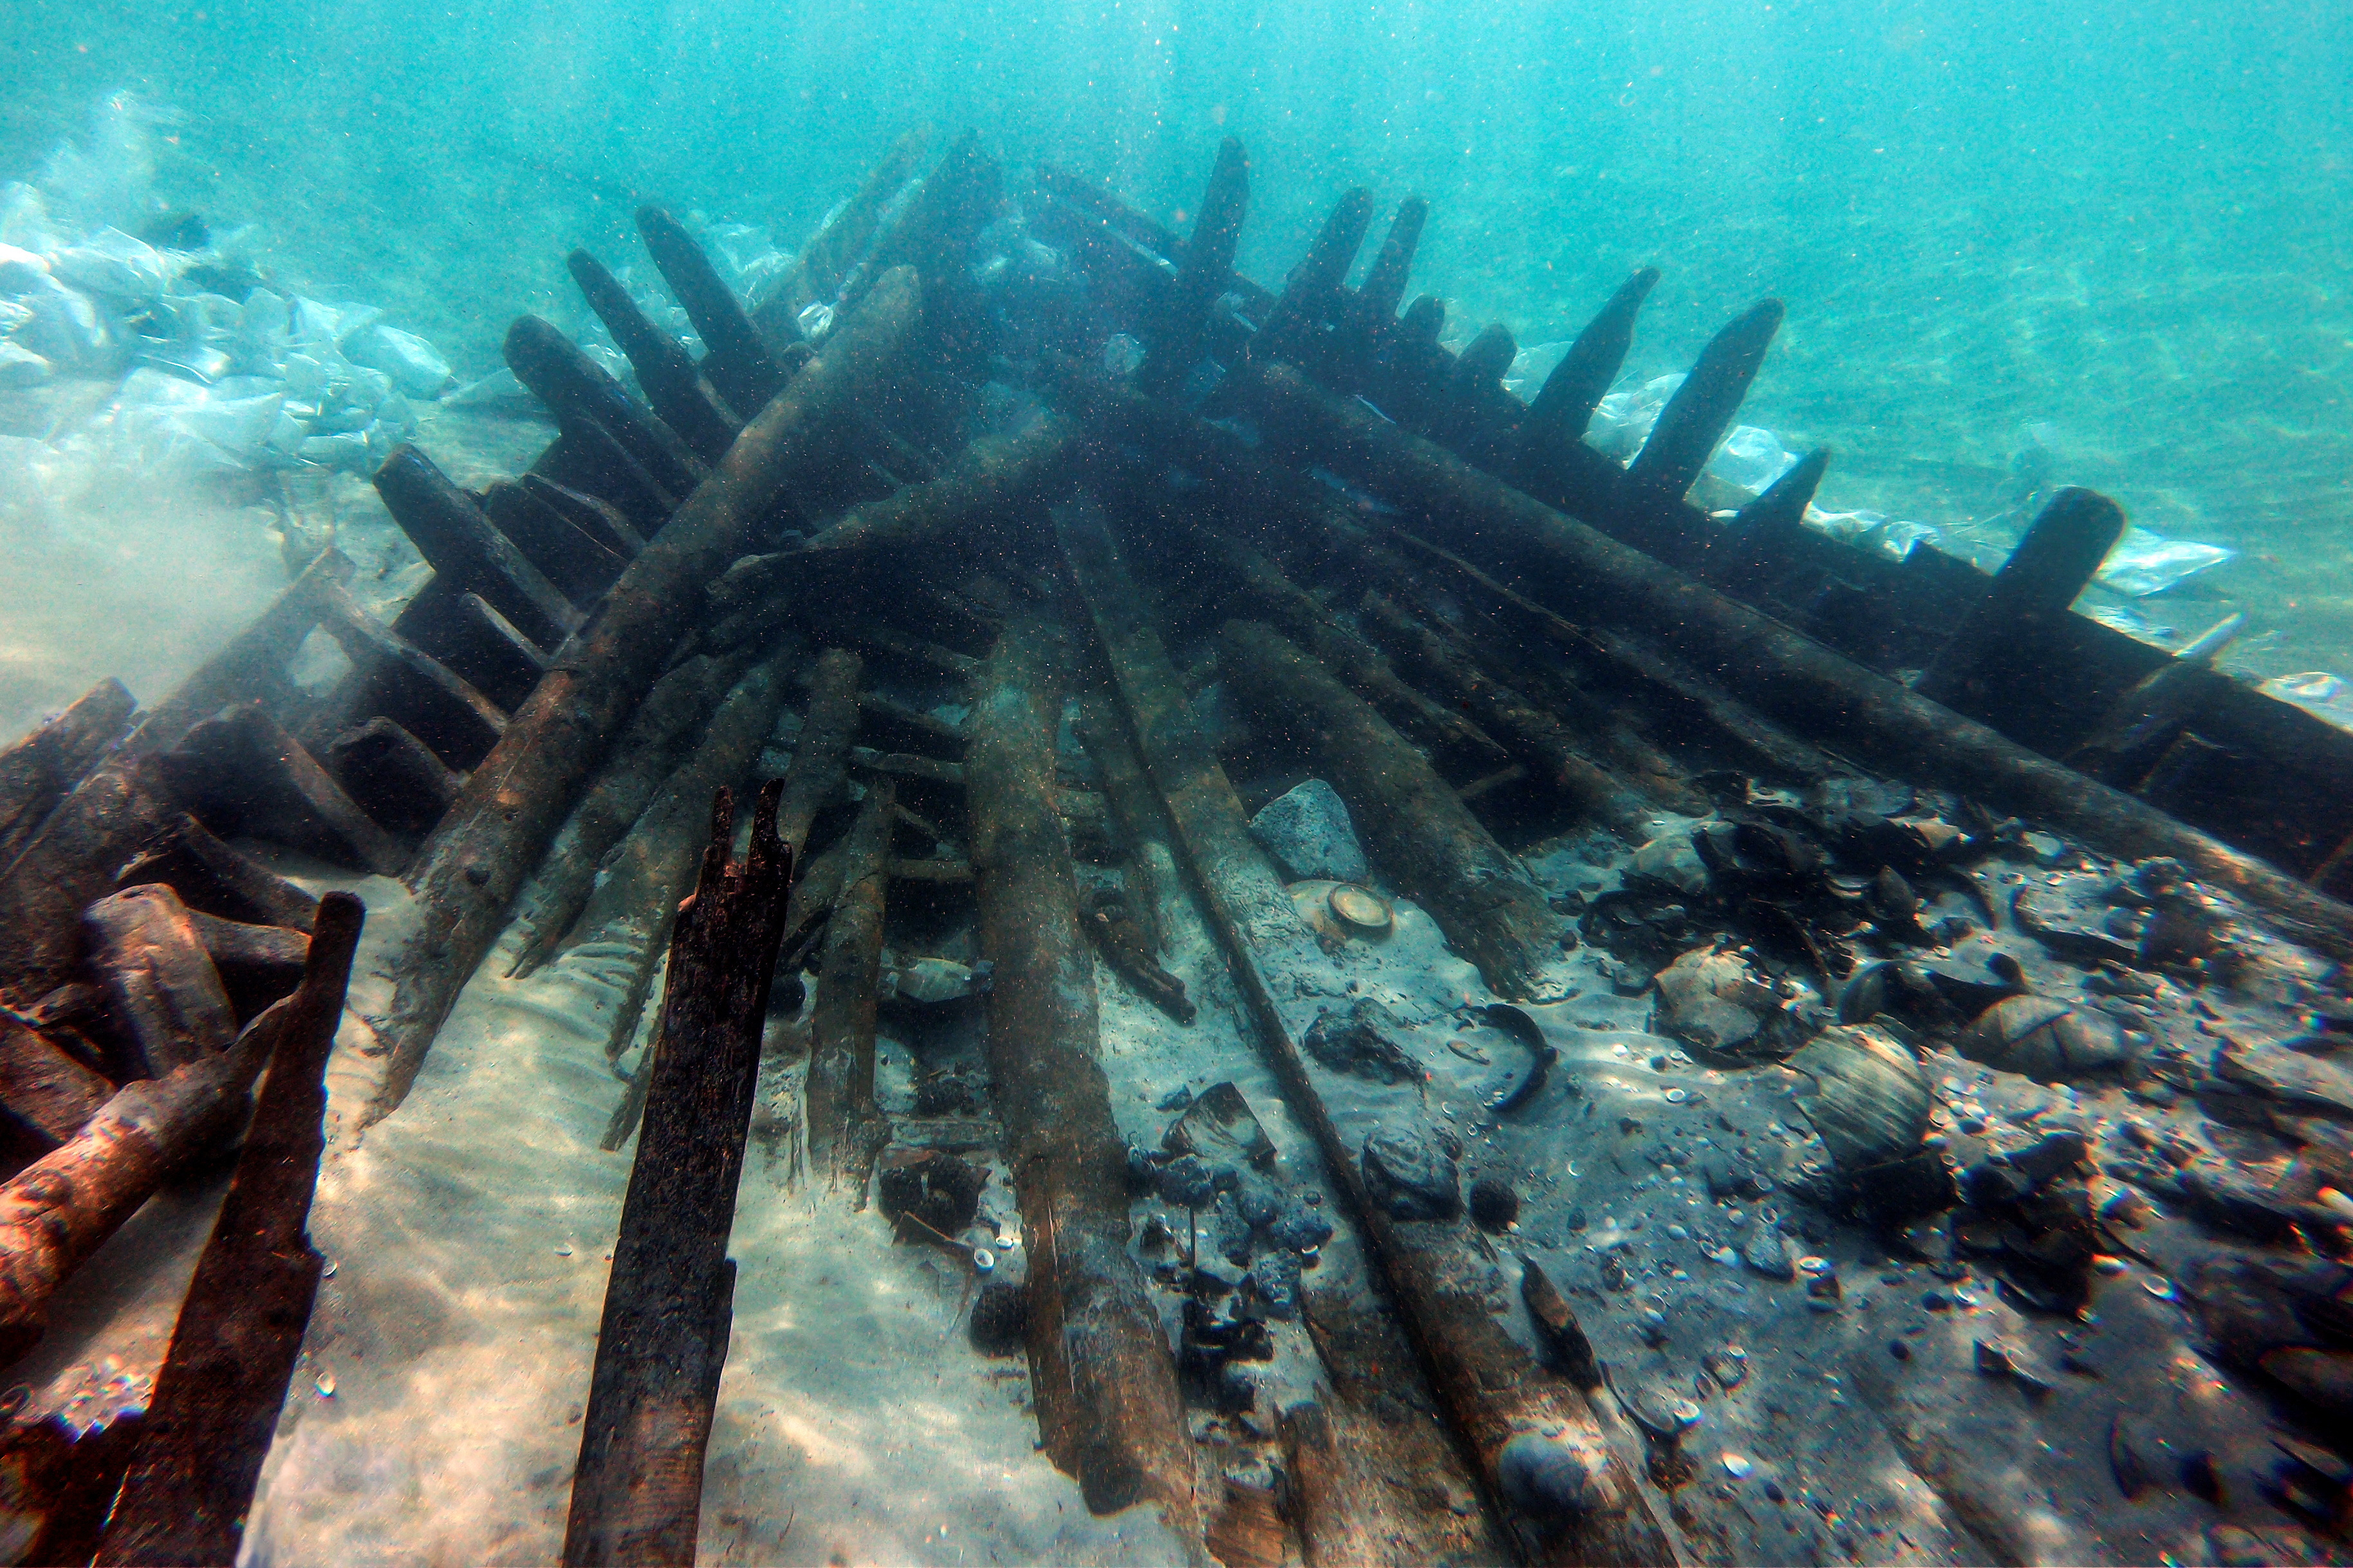 A view of the excavation of an ancient cargo ship, which is believed to have carried goods from all over the Mediterranean